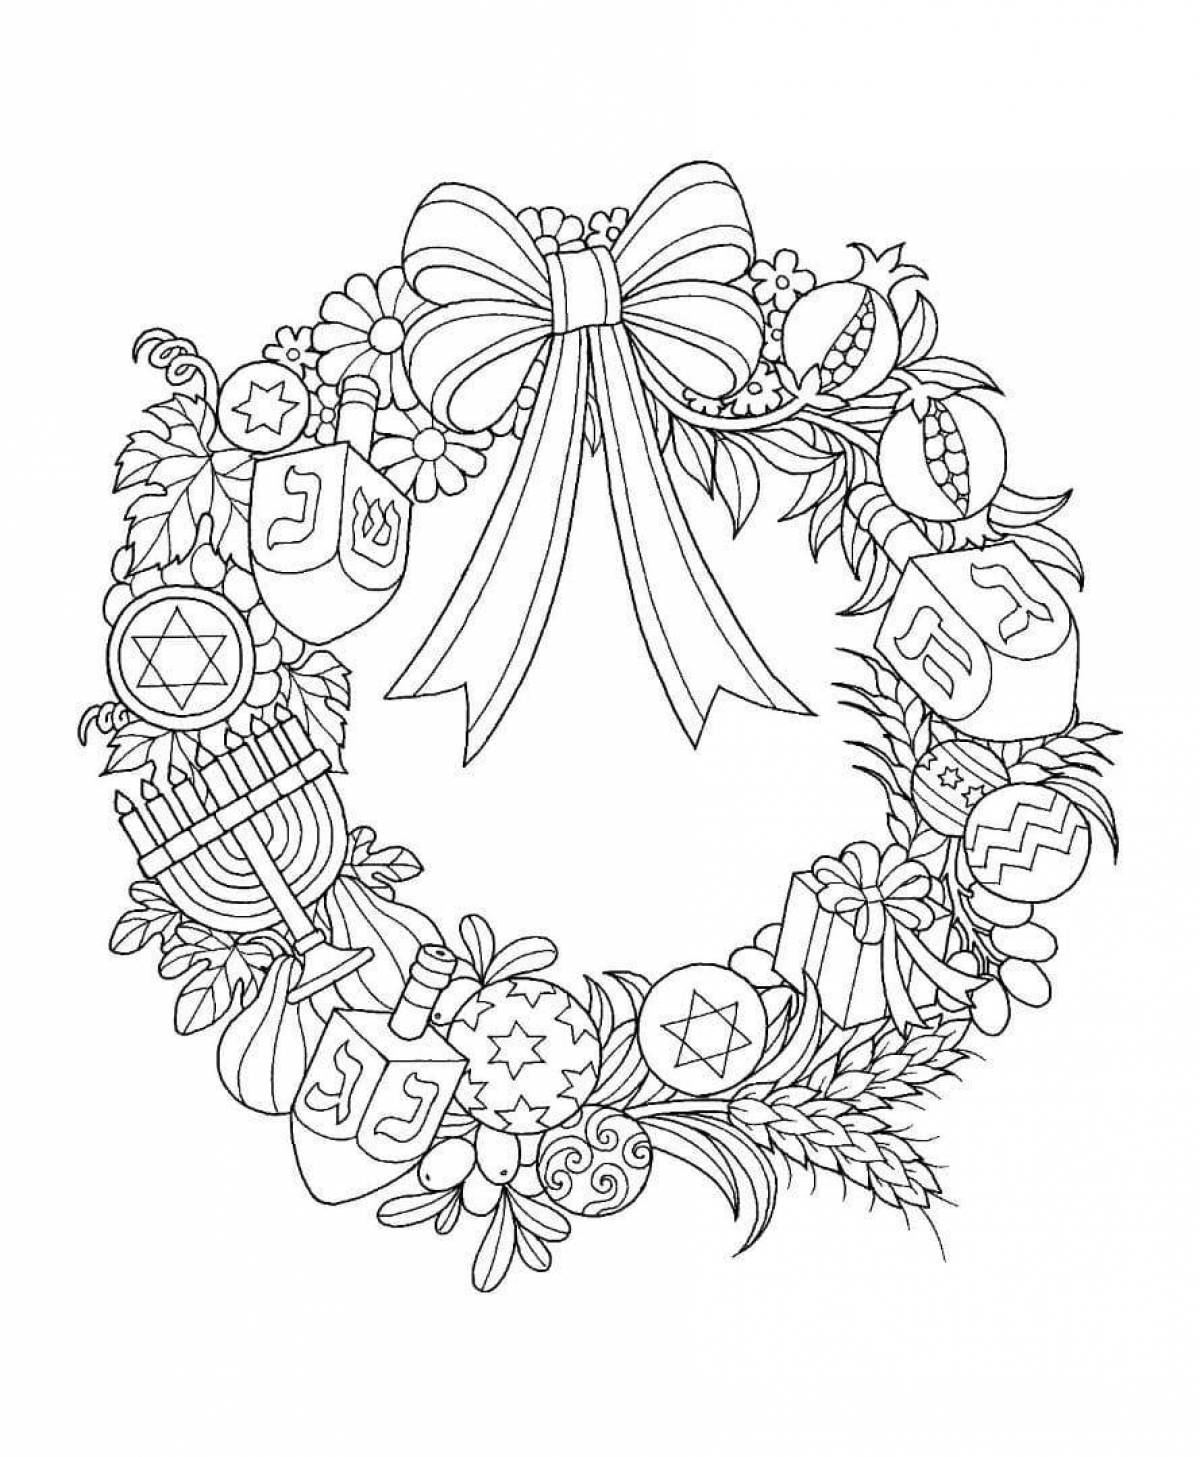 Coloring book decorated Christmas wreath